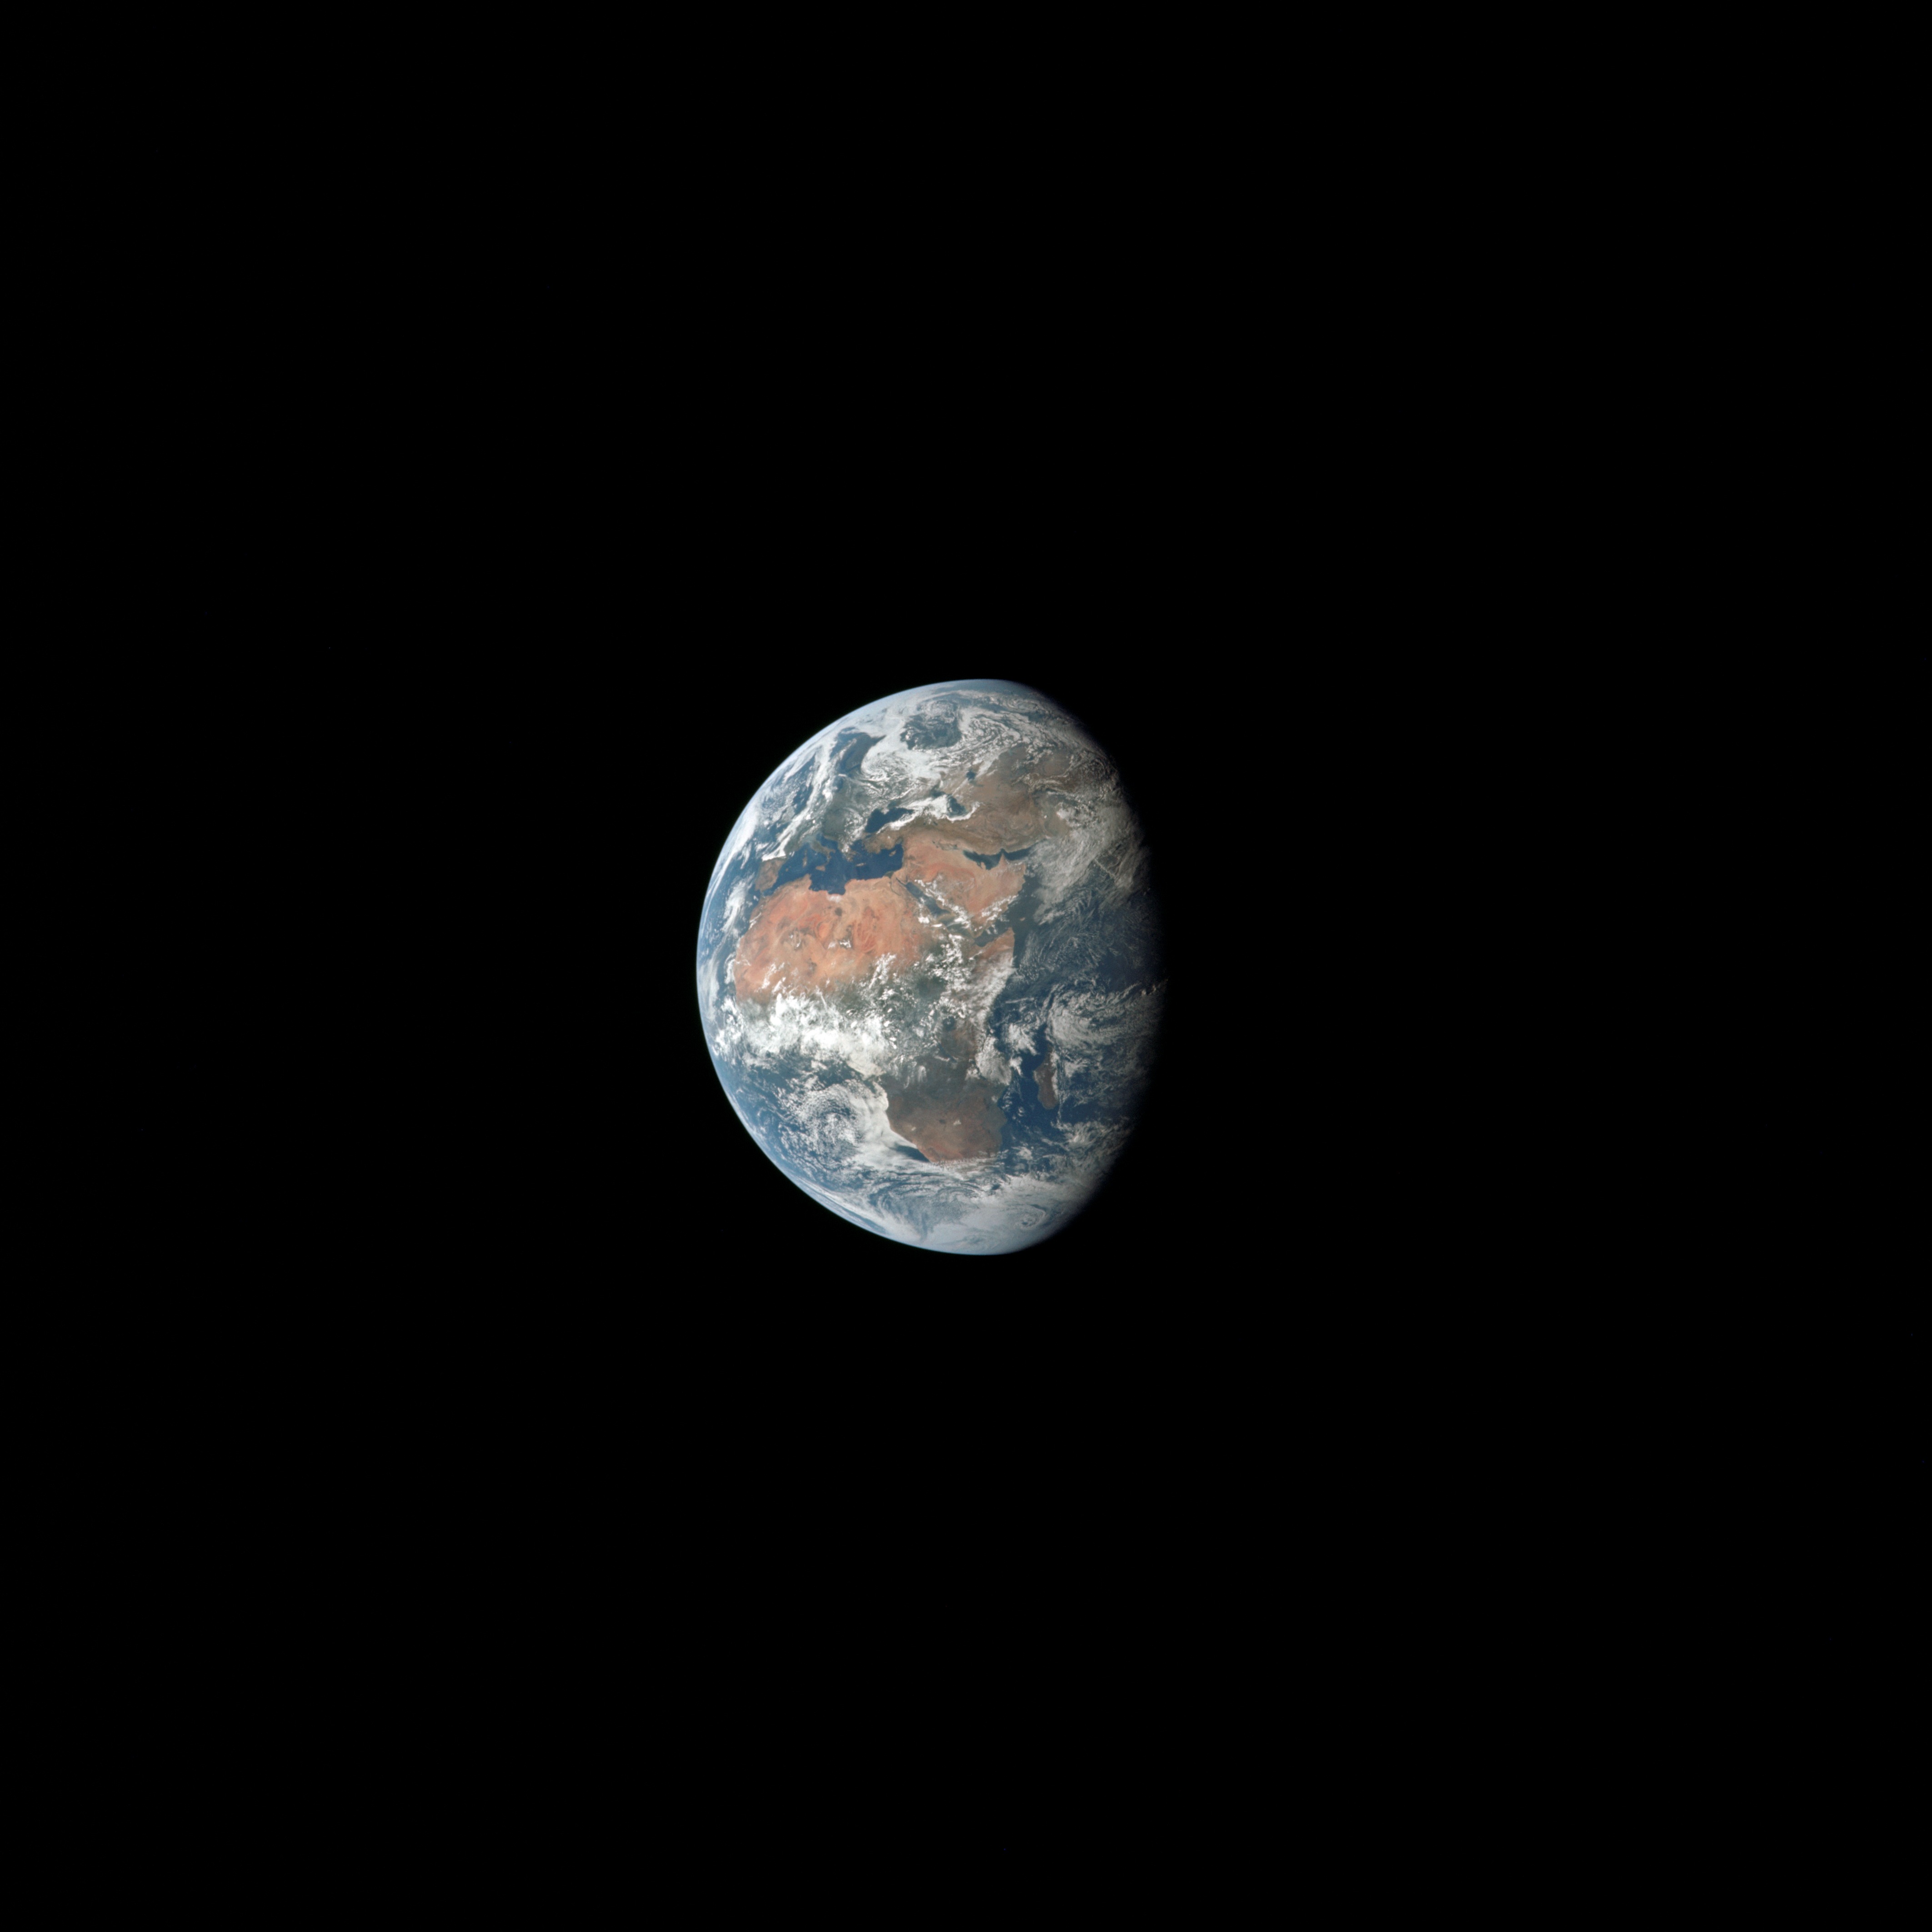 A view to the Earth taken by the Apollo 11 crew on July 19, 1969, on the third day of the mission to the Moon.